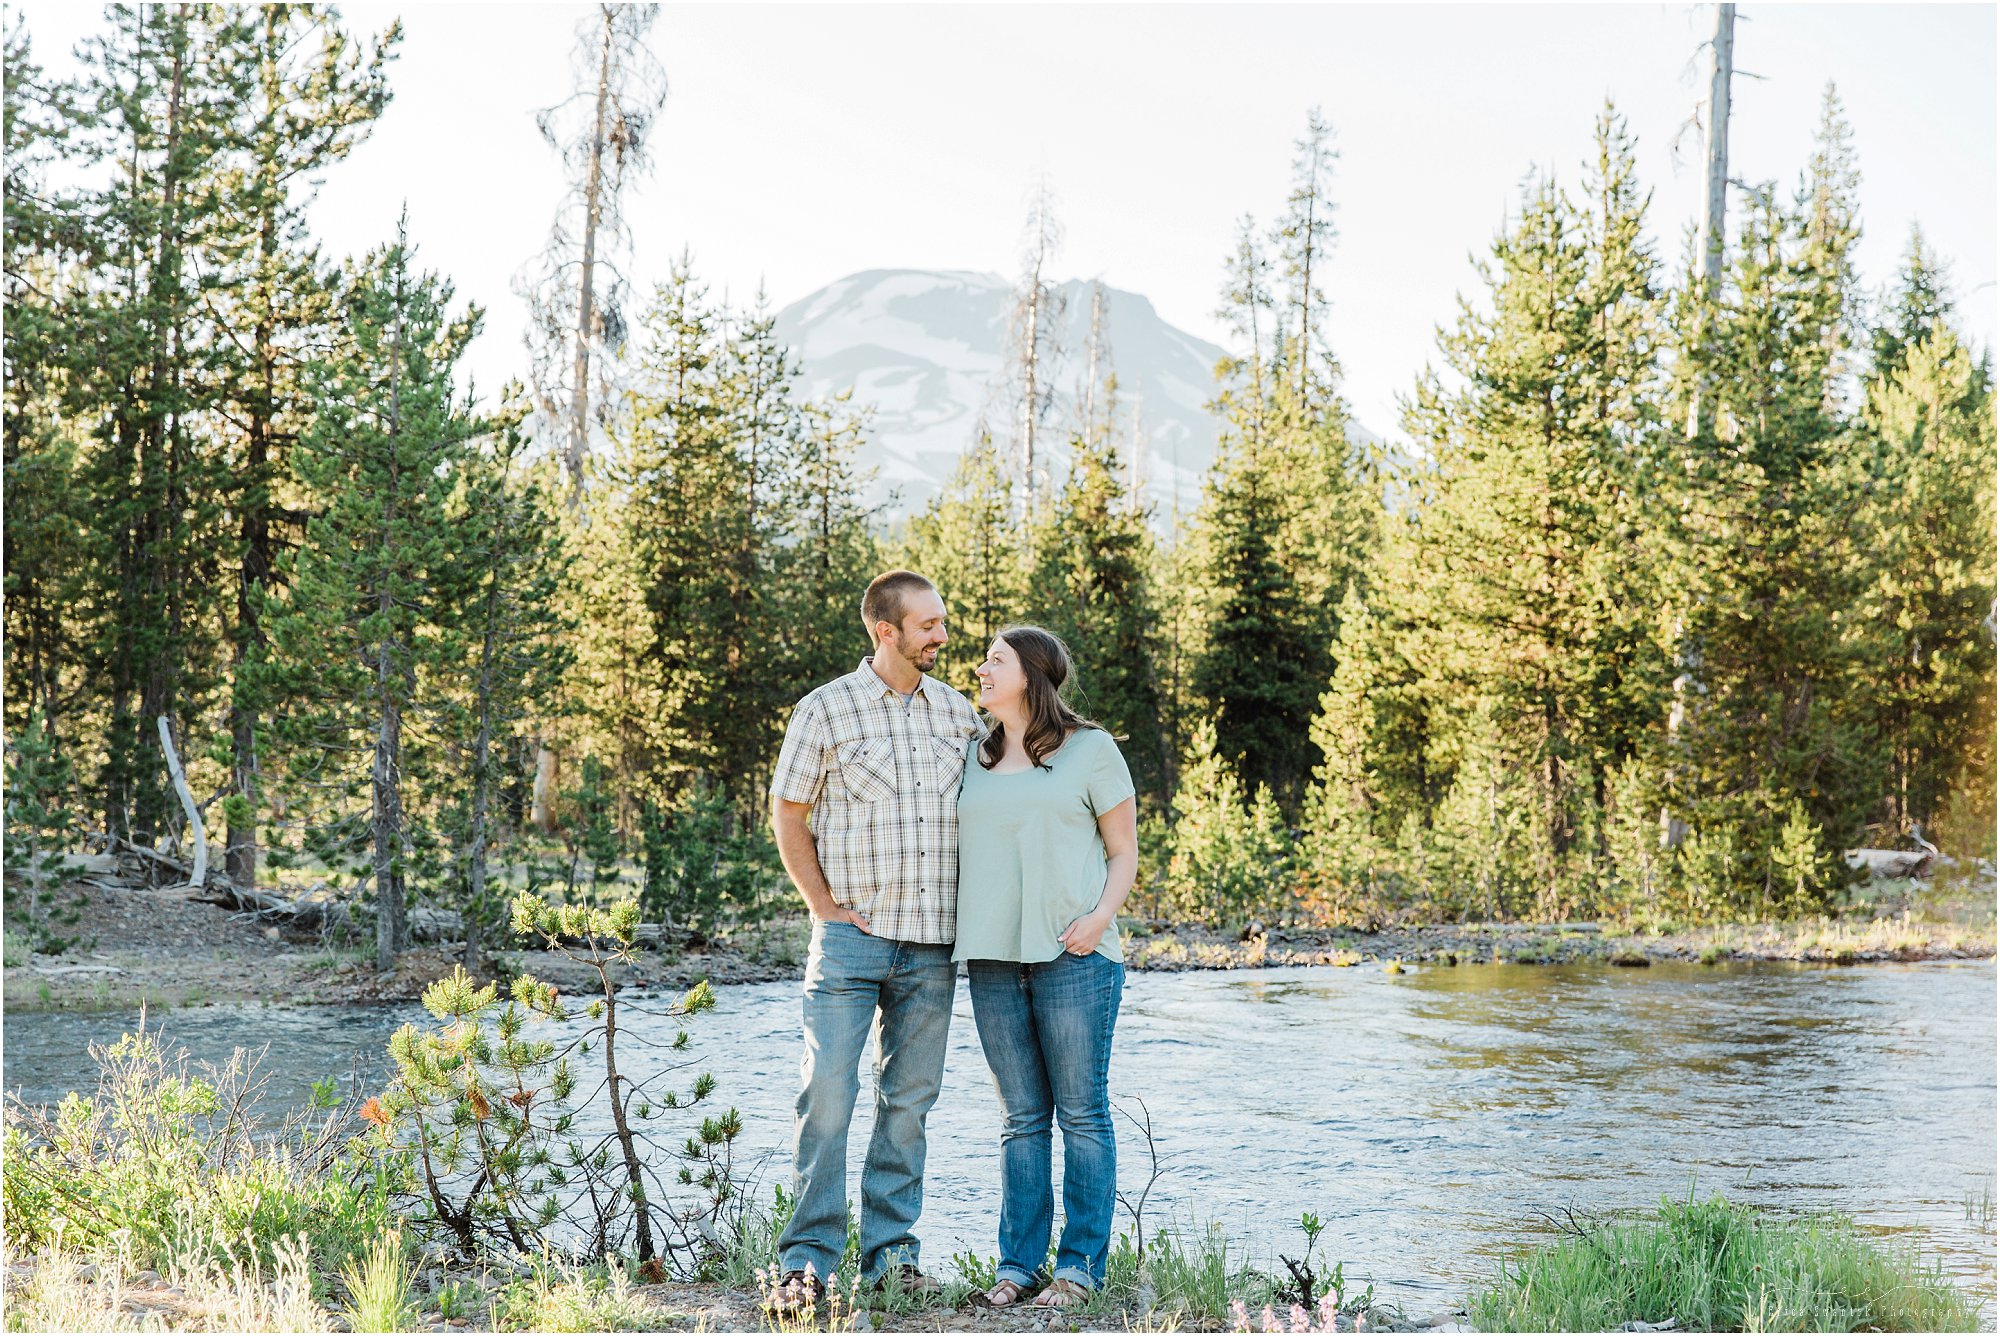 A beautiful Cascade Mountain engagement photography session near Bend, OR. | Erica Swantek Photography